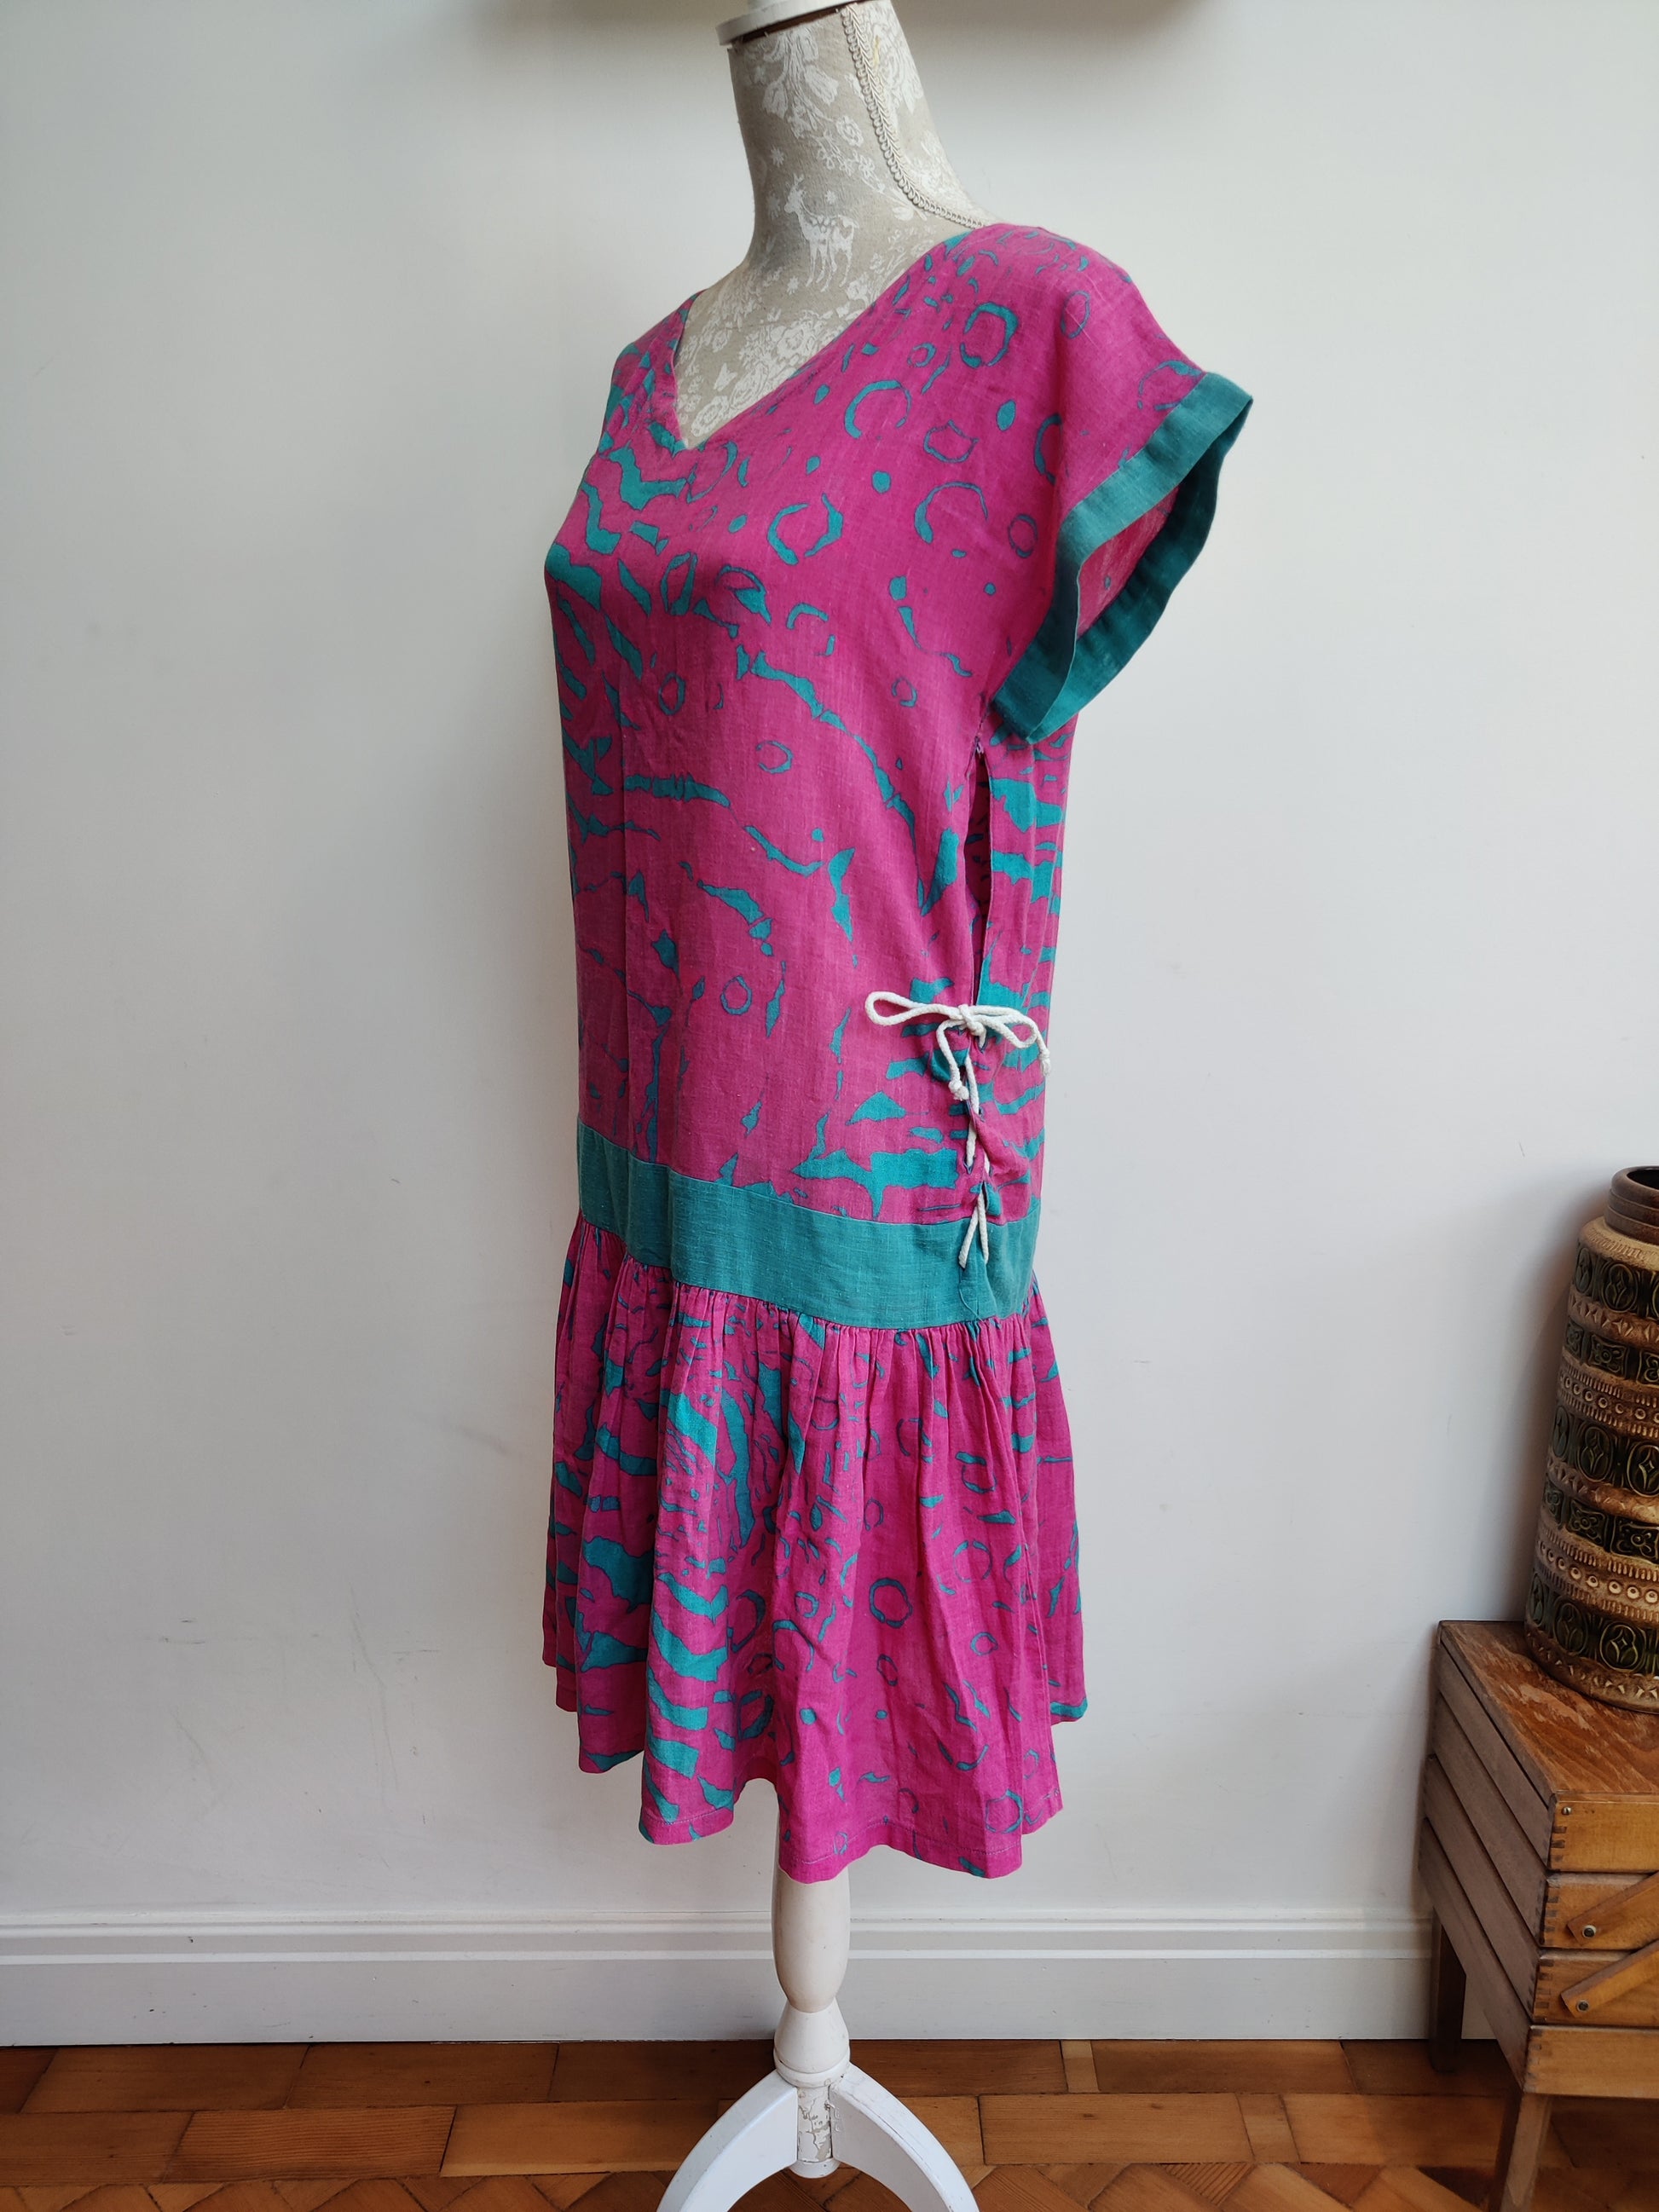 Blue and pink 80s abstract dress with tie sides.